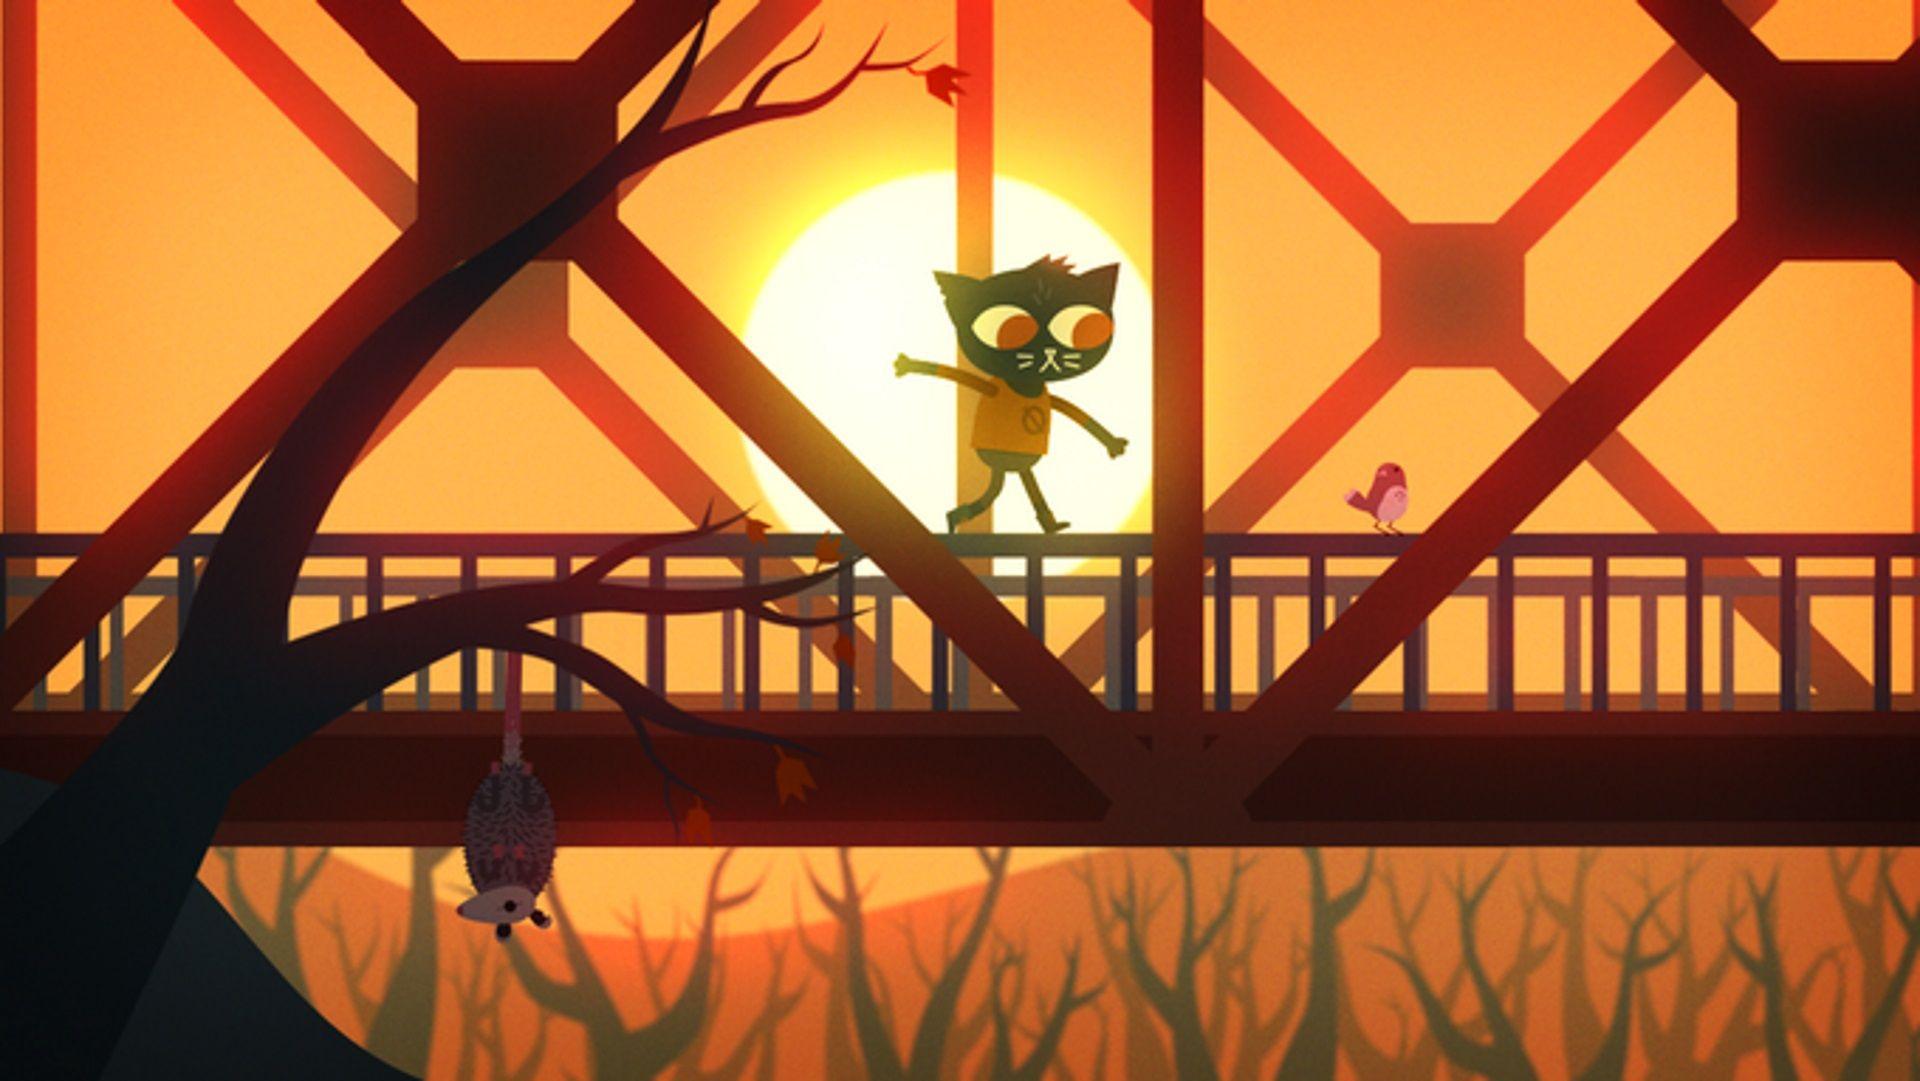 Preview: Night in the Woods tells a somber human tale